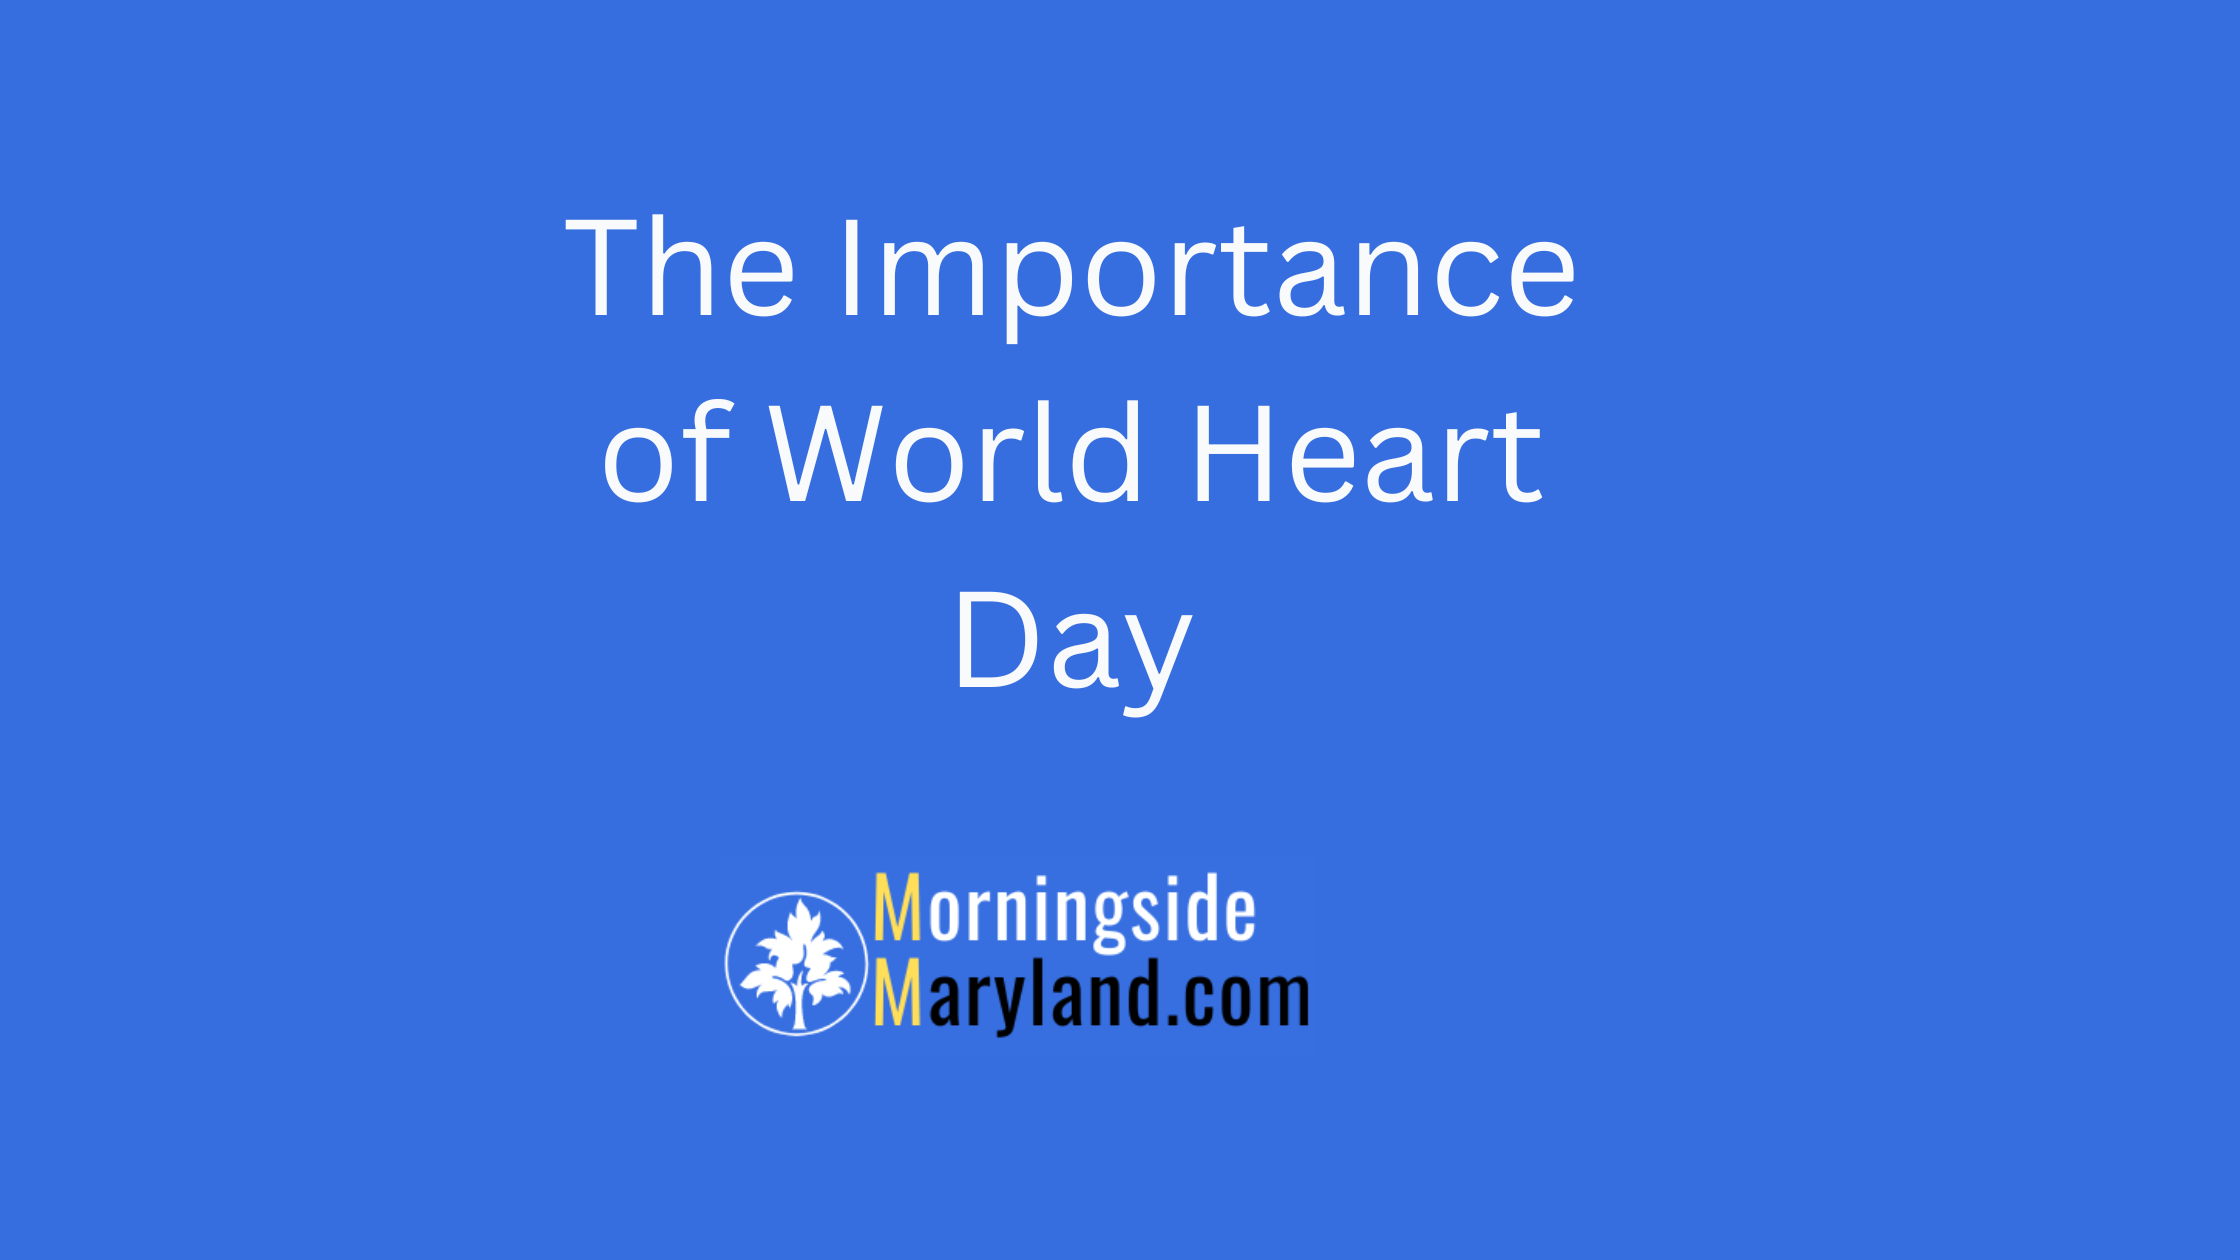 The Importance of World Heart Day